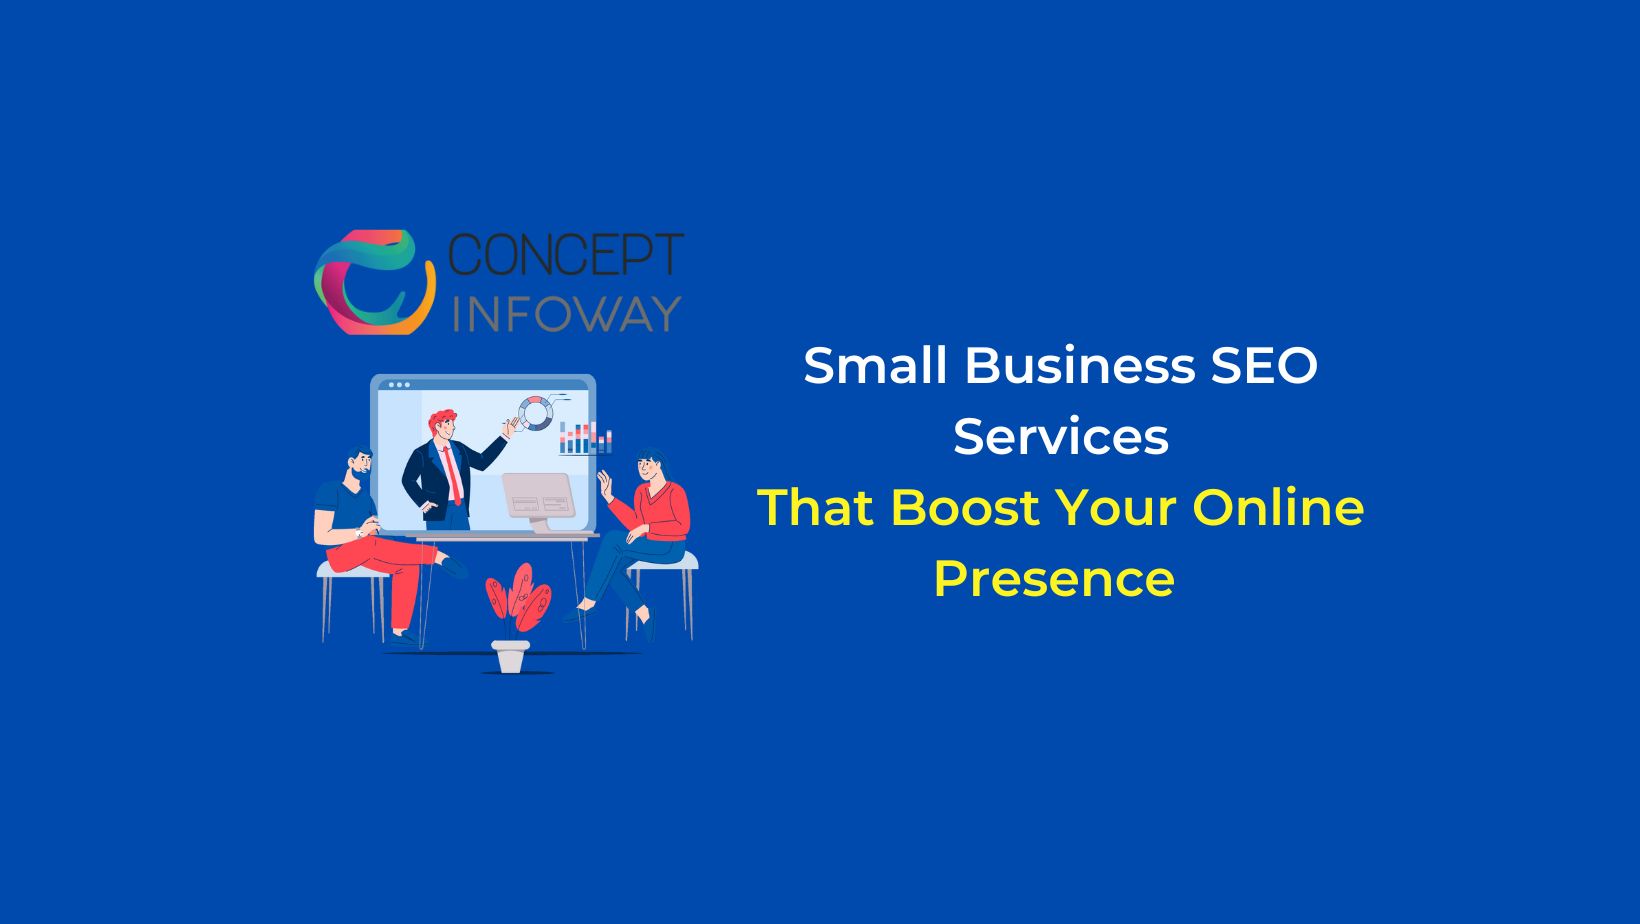 Small Business SEO Services That Boost Your Online Presence